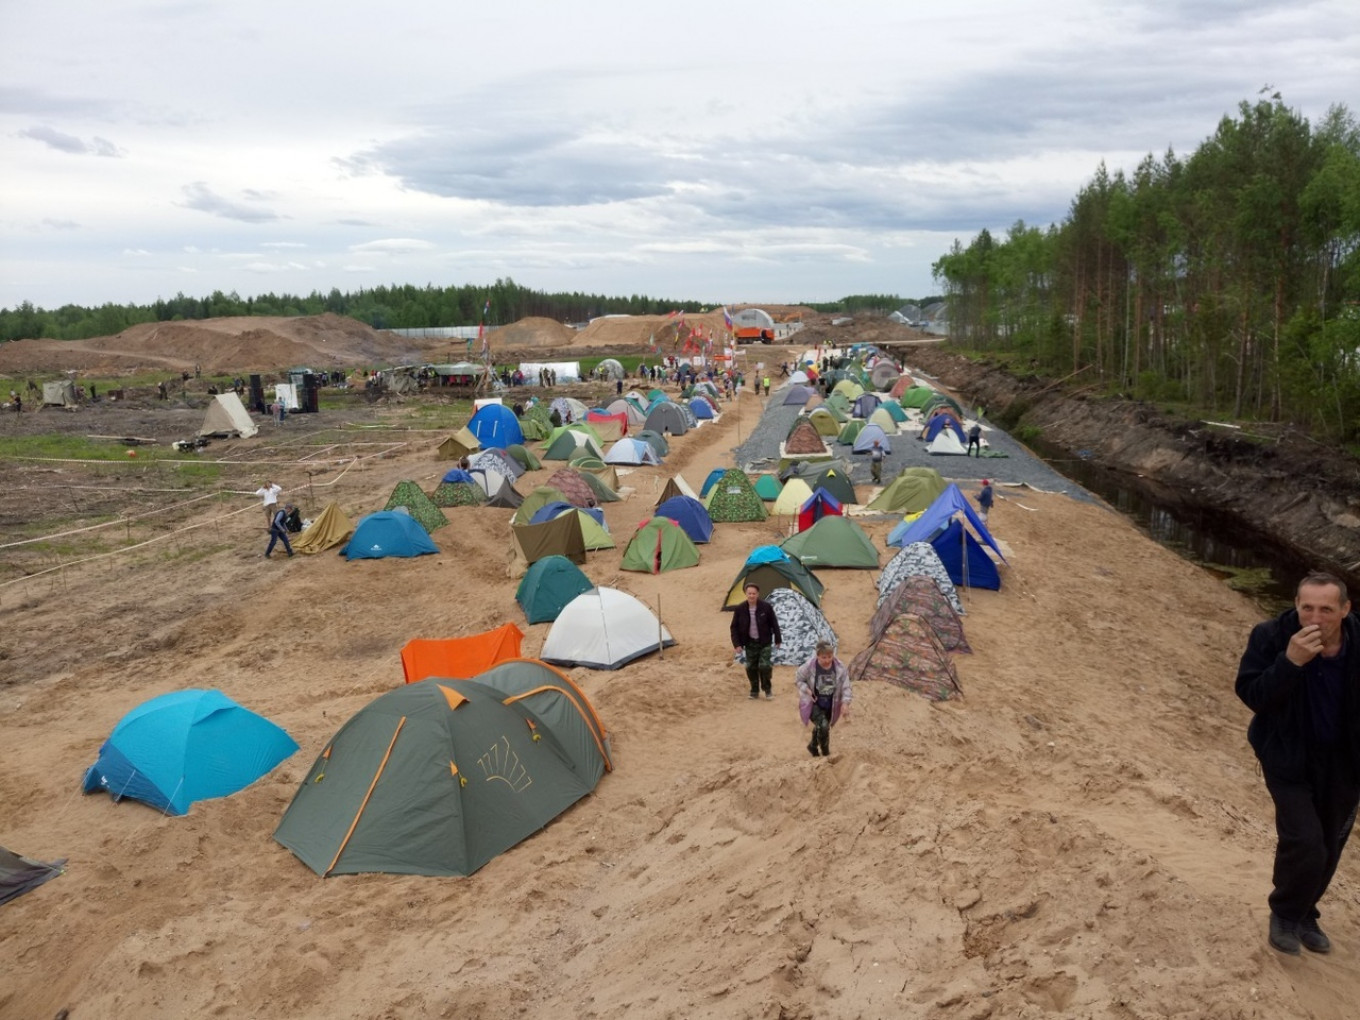 Crowds of Protesters Set Up Camp Against Landfill in Russia’s North